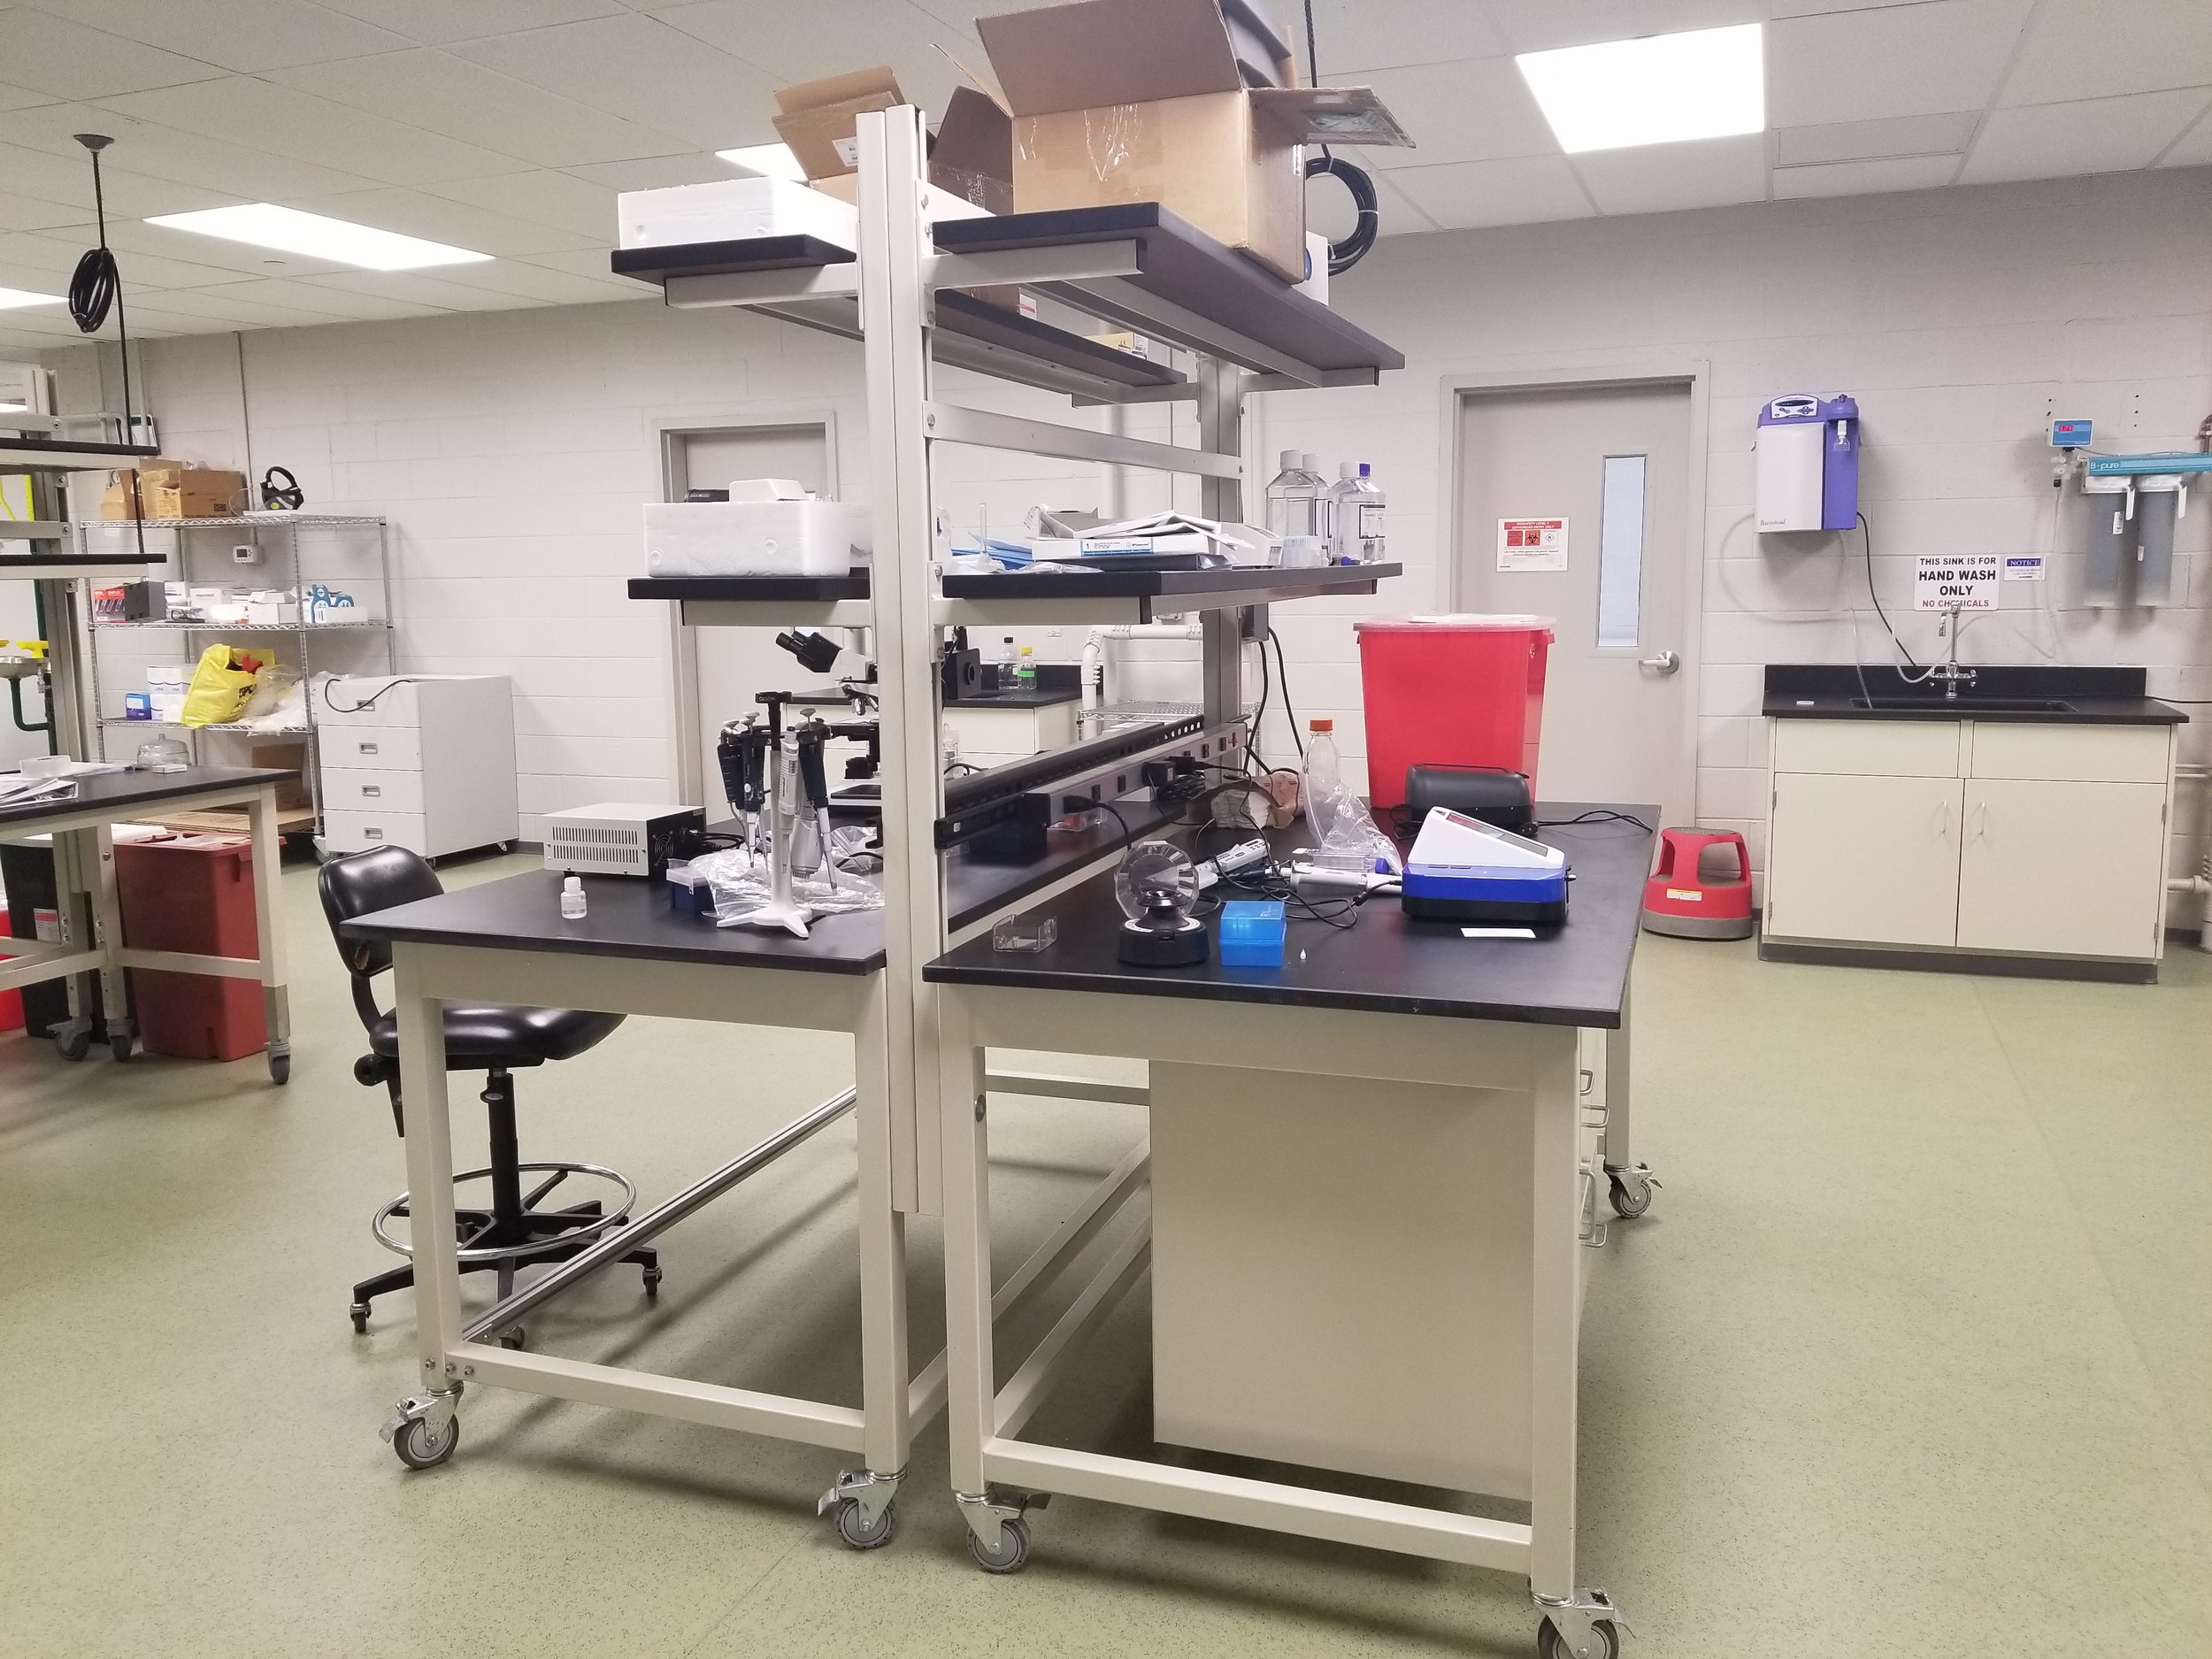 Lab space